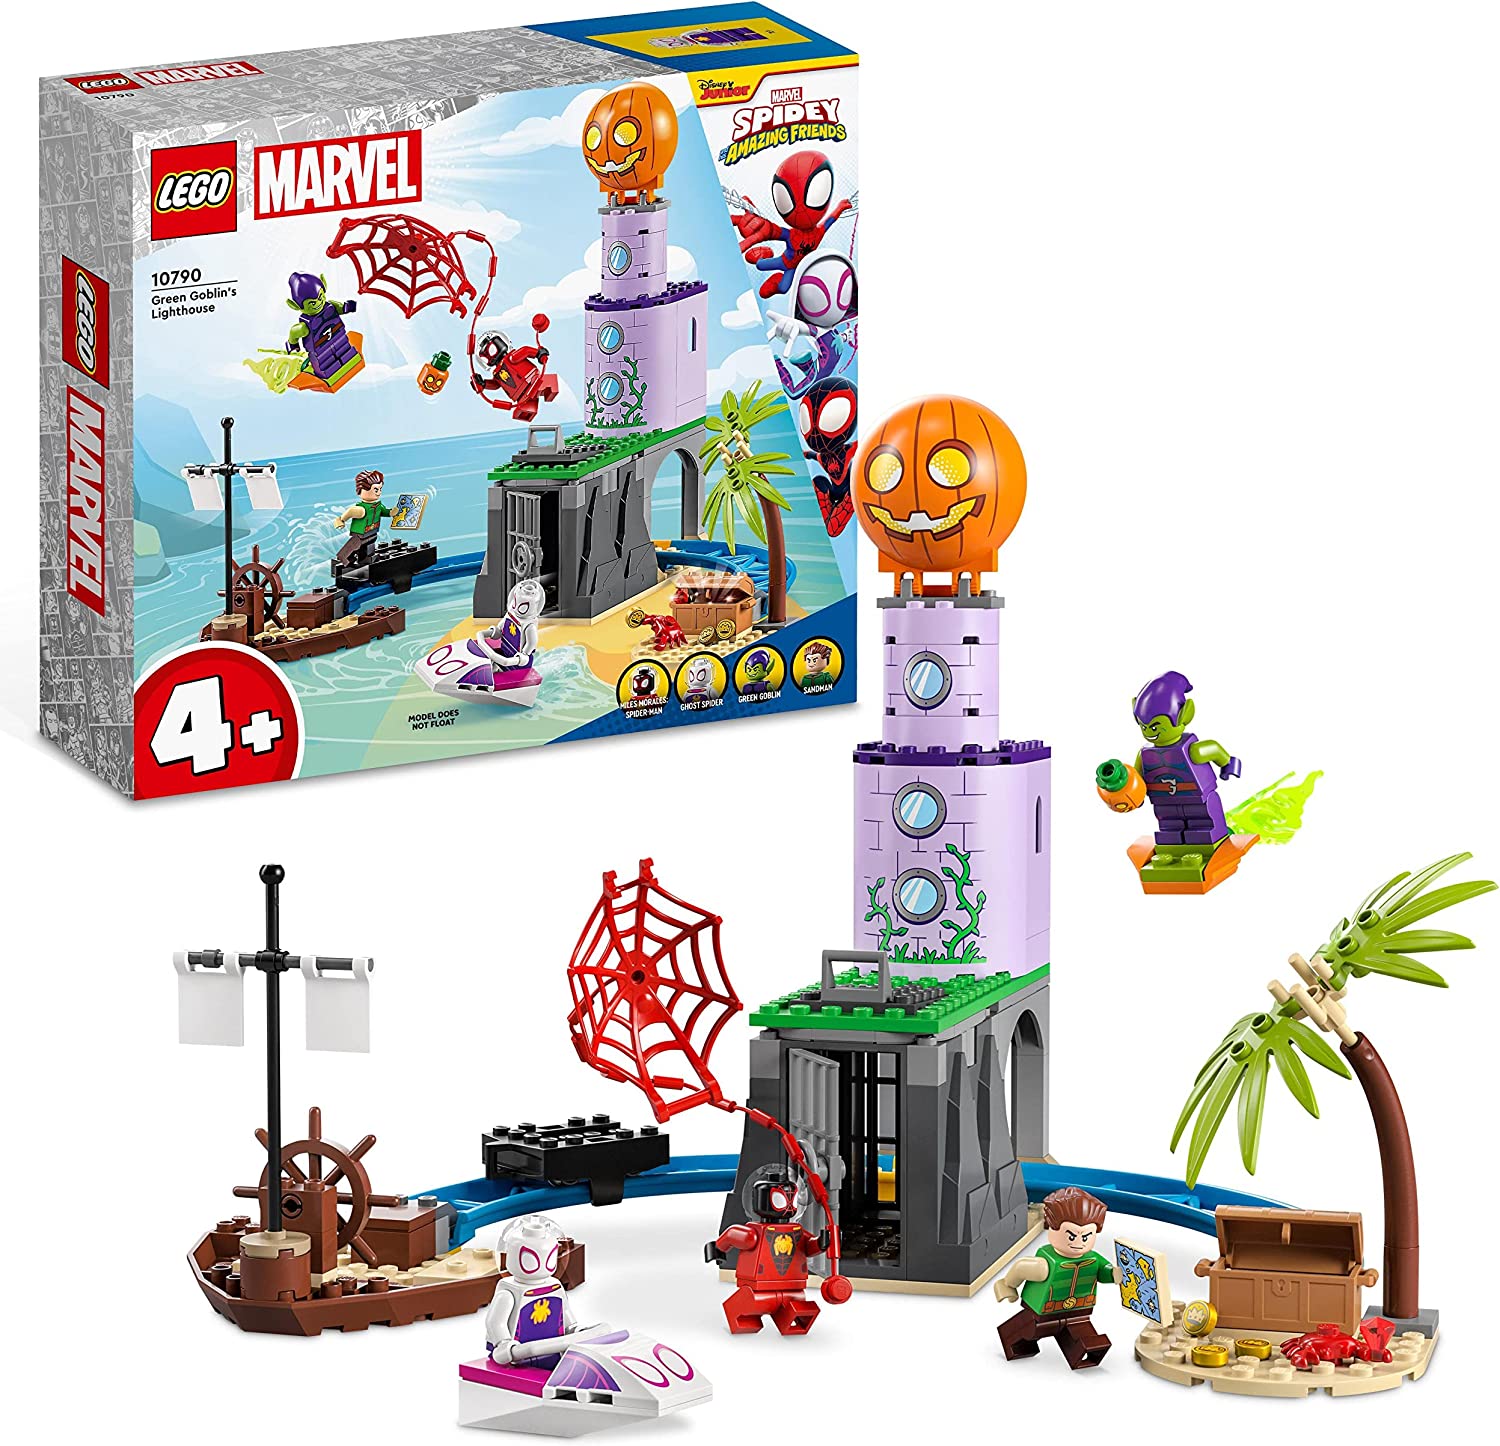 LEGO 10790 Marvel Spideys Team on Green Goblins Lighthouse, Toy for Children from 4 years with pirate Ship, Miles Morales Mini Figure & More, Spidey and his Super Friends